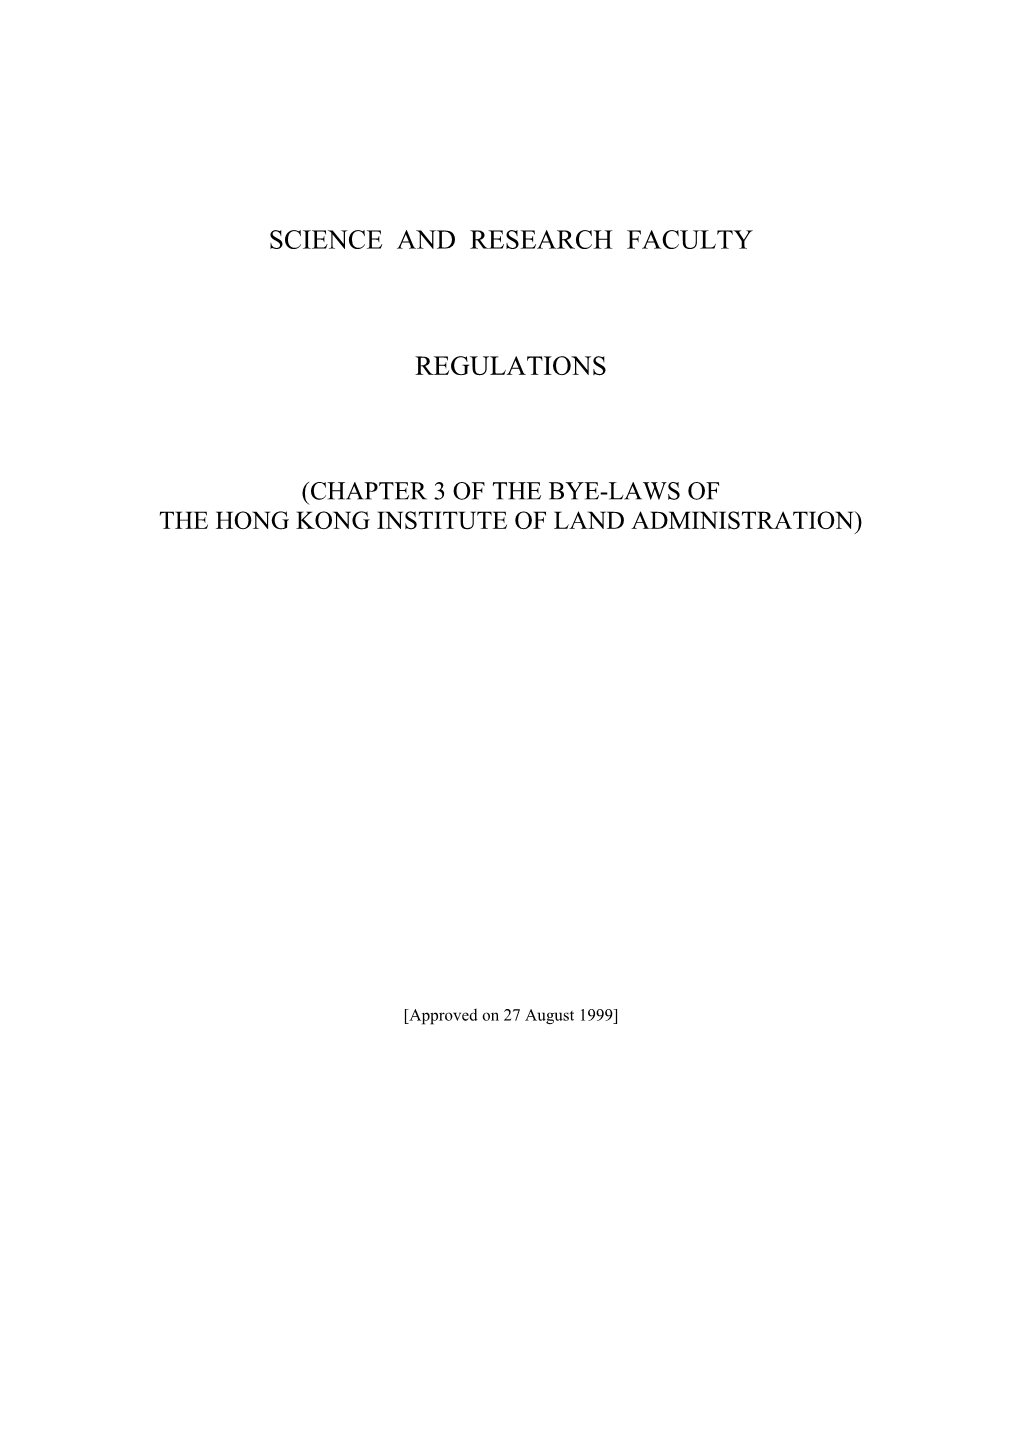 Science and Research Facullty